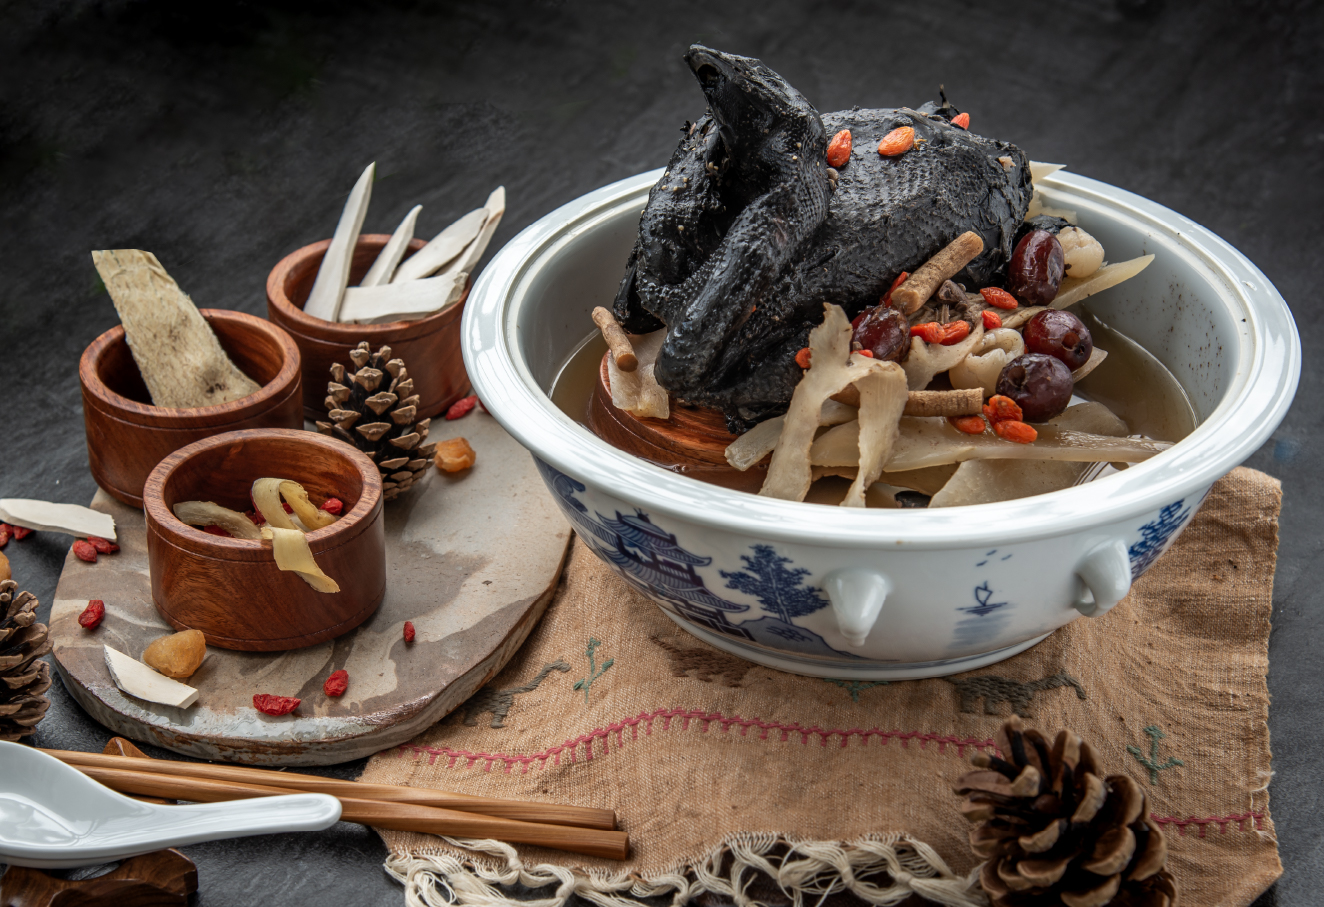 Eight Treasure Herbal Soup with whole Black Chicken in a huge bowl. Three bowls of herbal ingredients on the side.